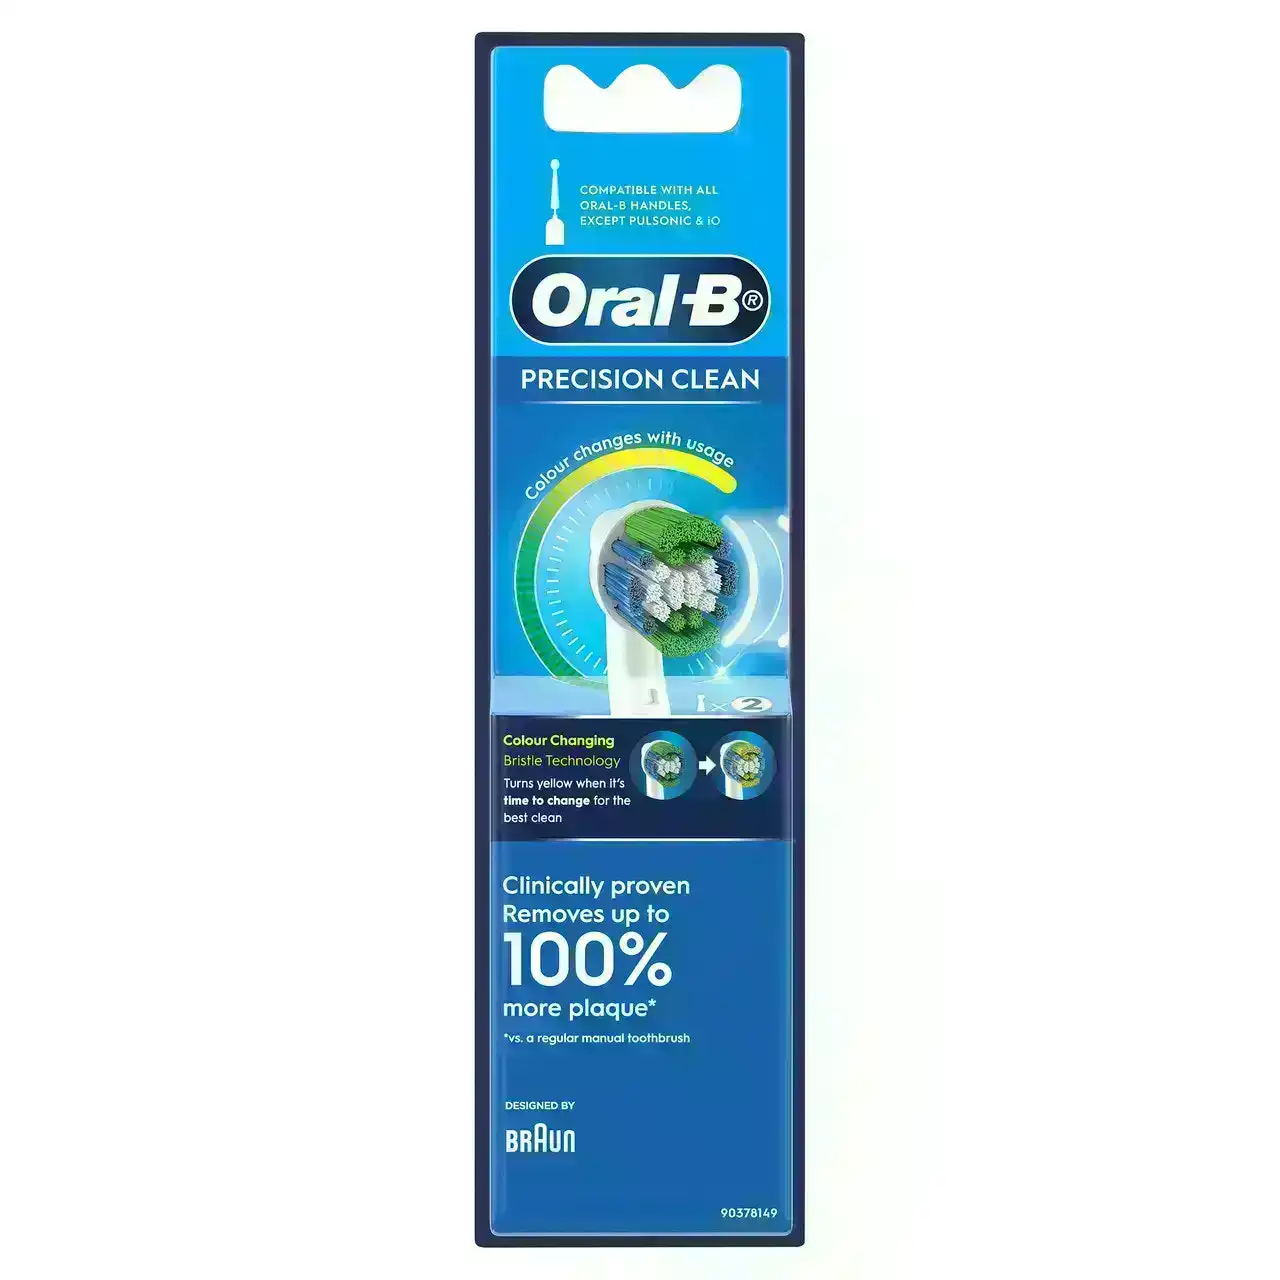 Oral-B Precision Clean White Electric Toothbrush Refills 2 Pack